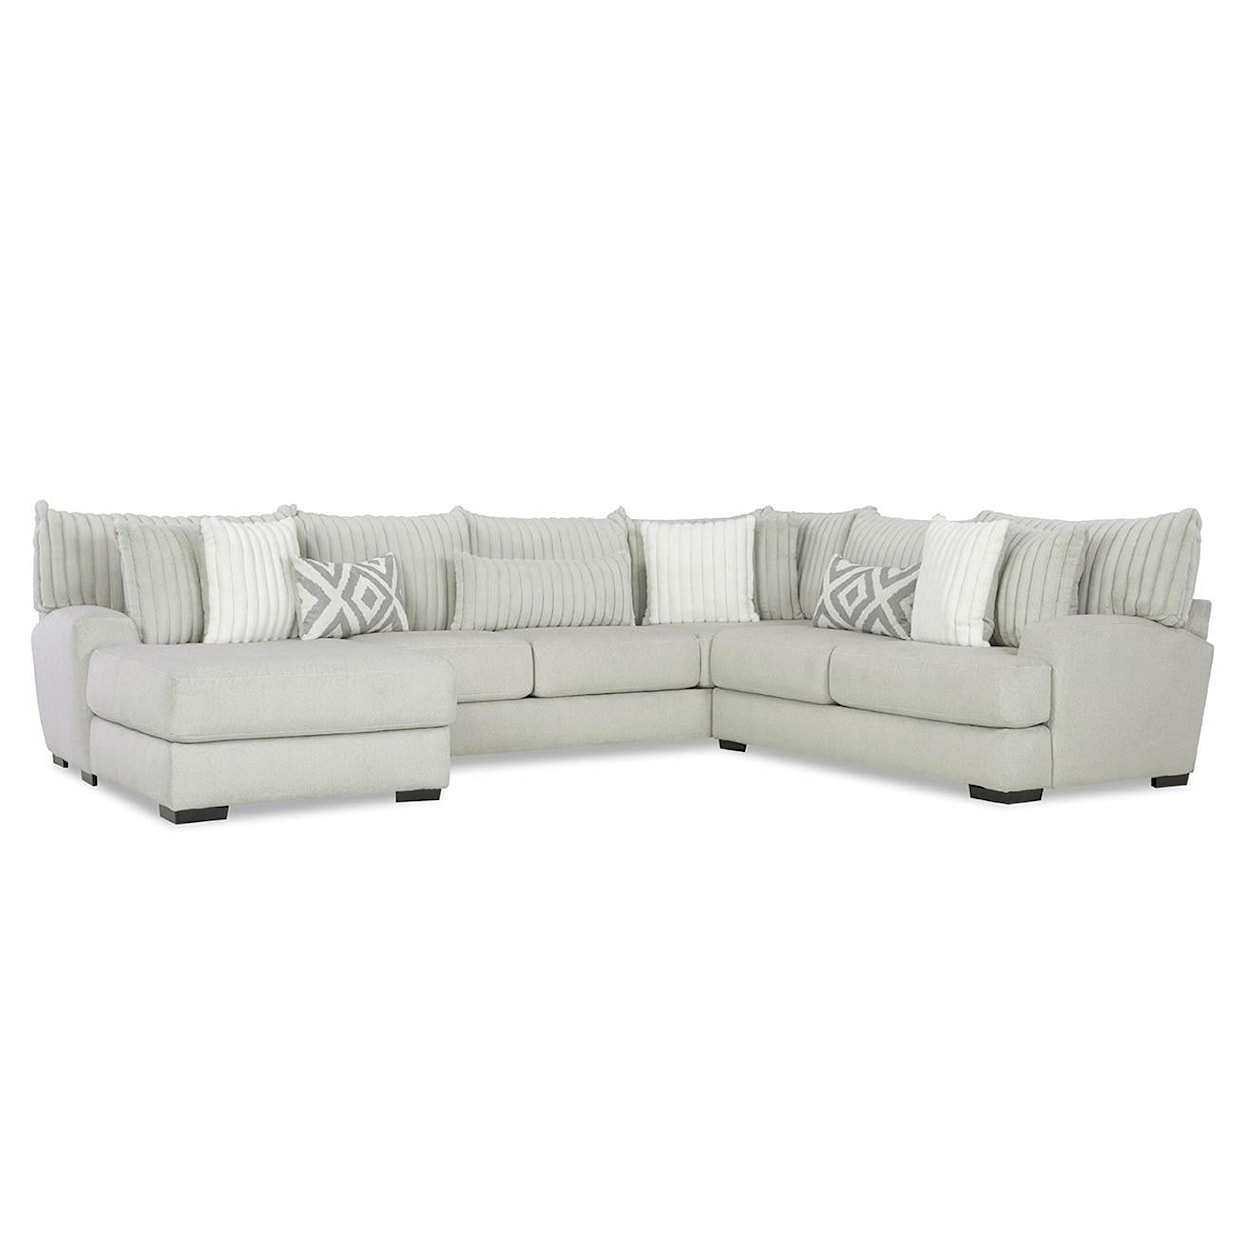 Albany 938 Tweed Silver 3-Piece Sectional Sofa